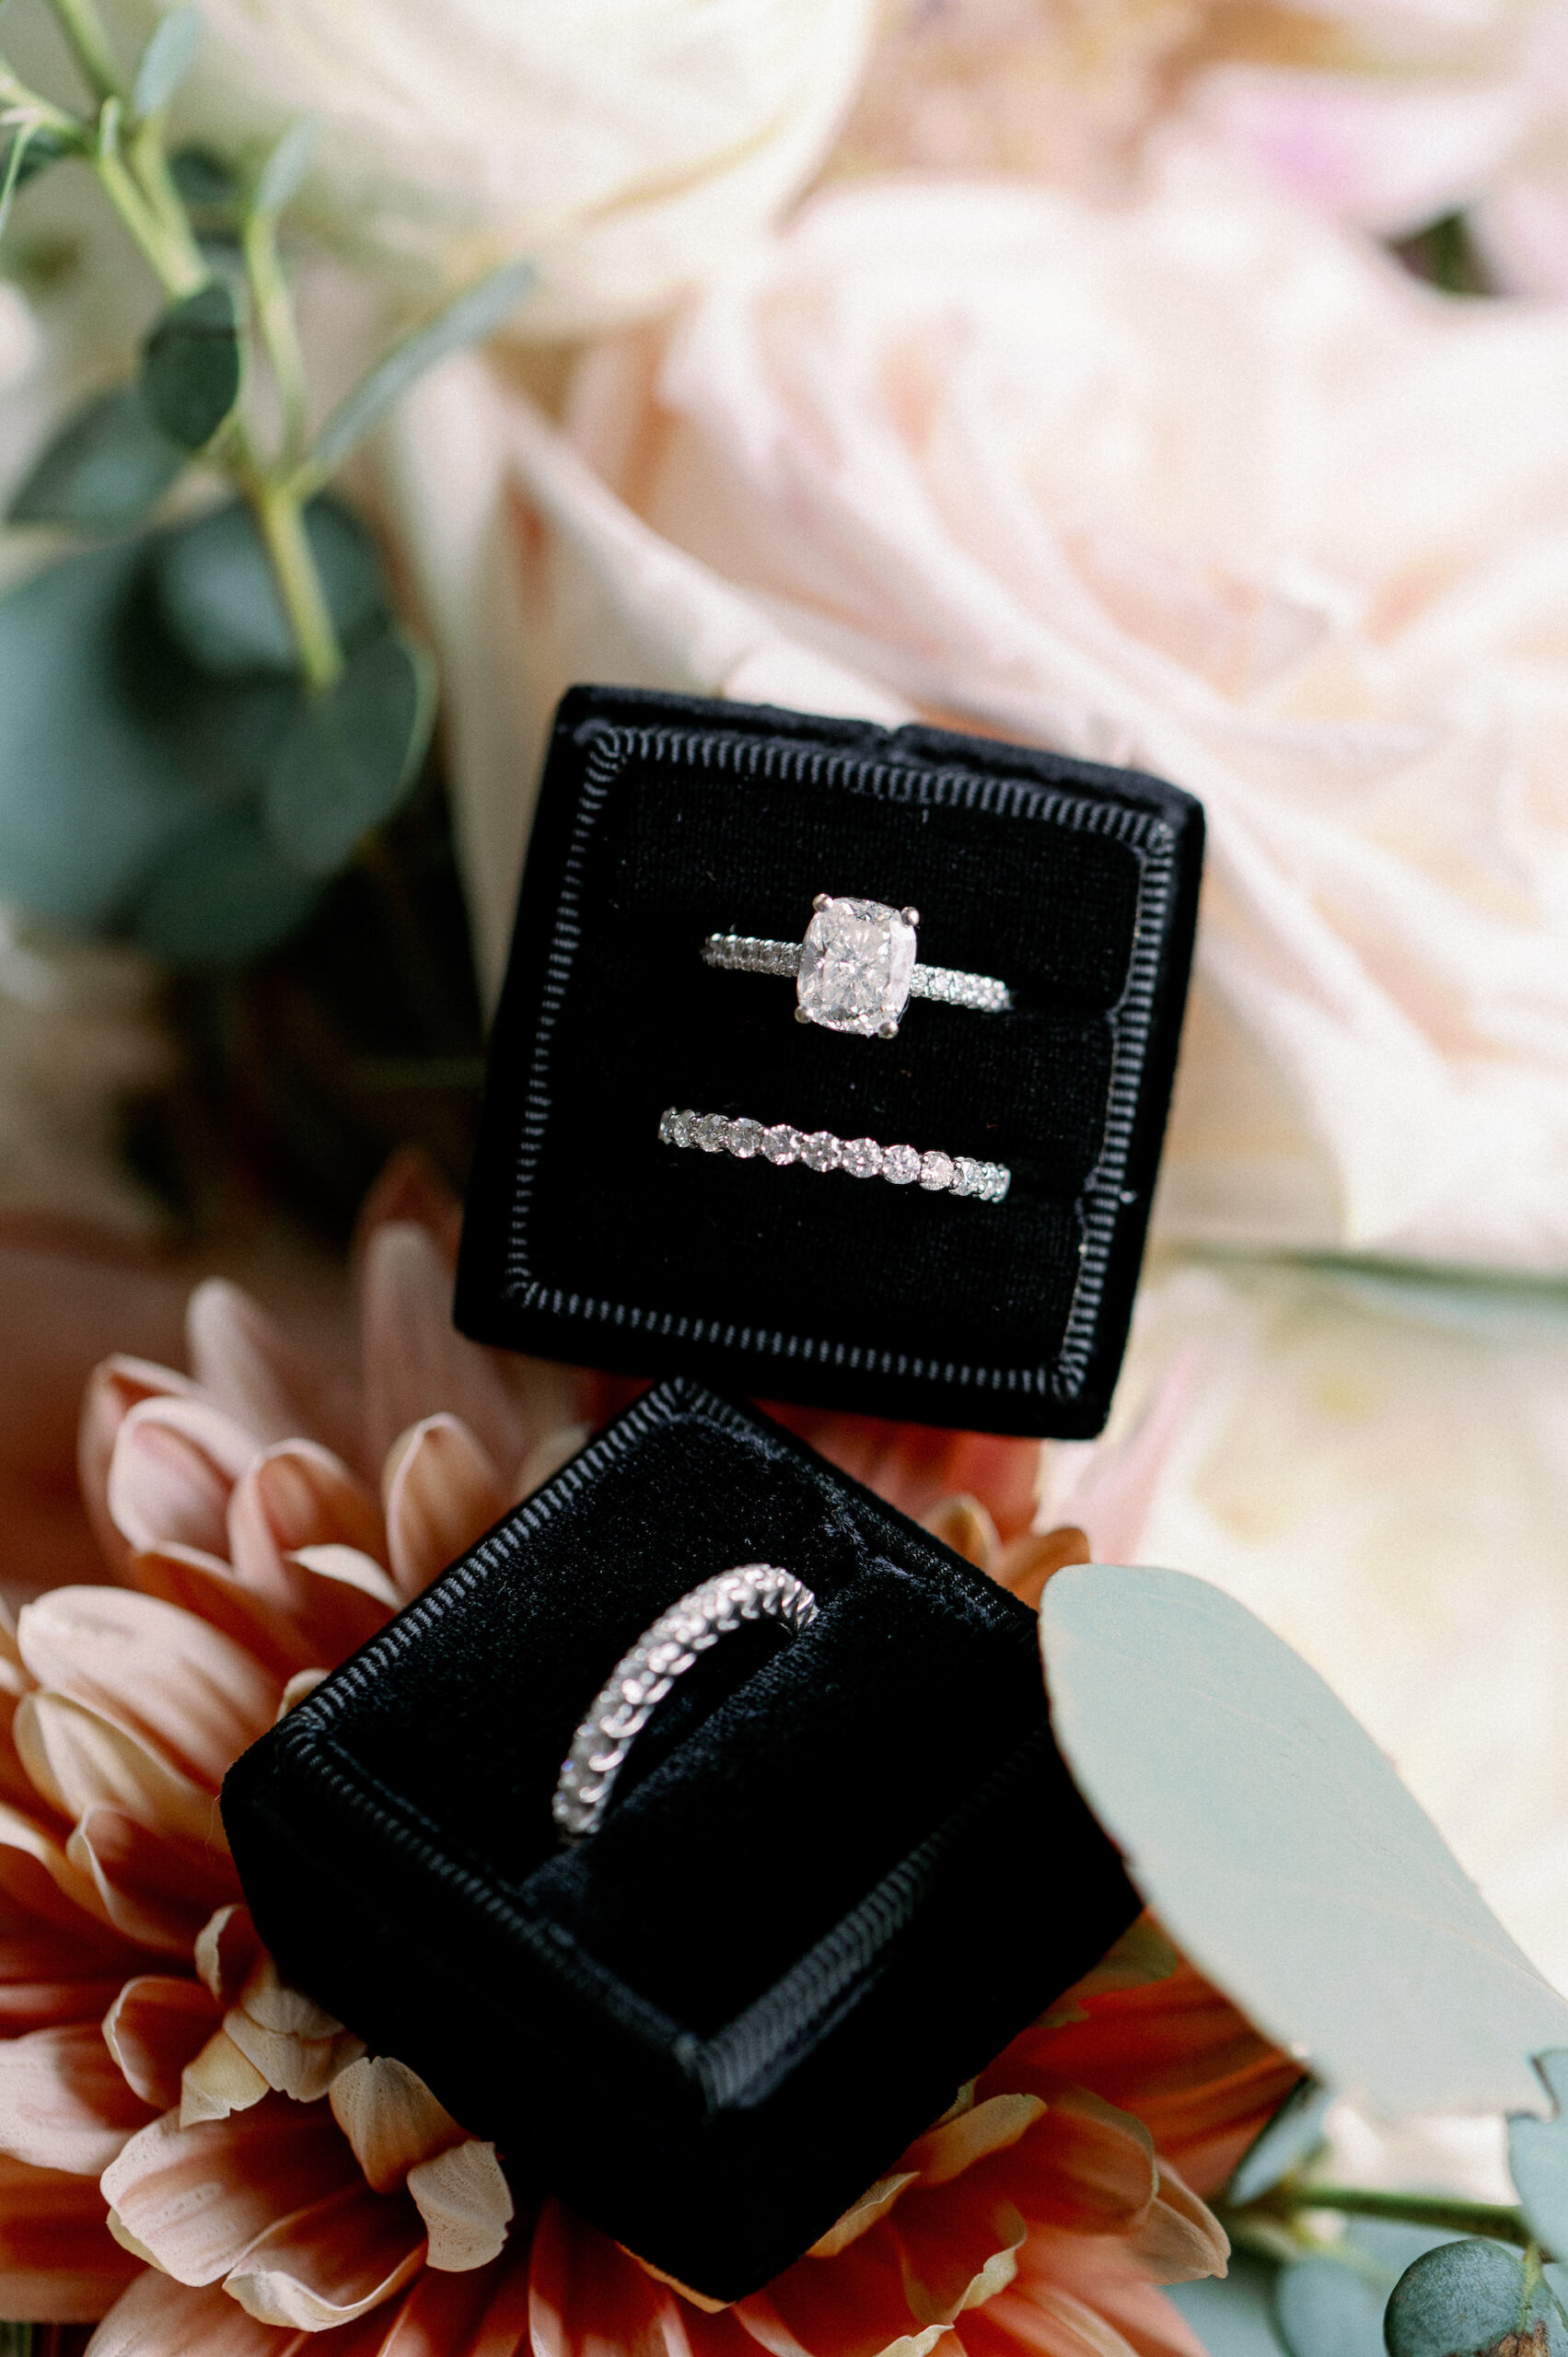 Cushion Cut Diamond Engagement Ring with Halo, Brides Wedding Rings in Black Velvet Ring Box | Tampa Bay Wedding Photographer Dewitt for Love